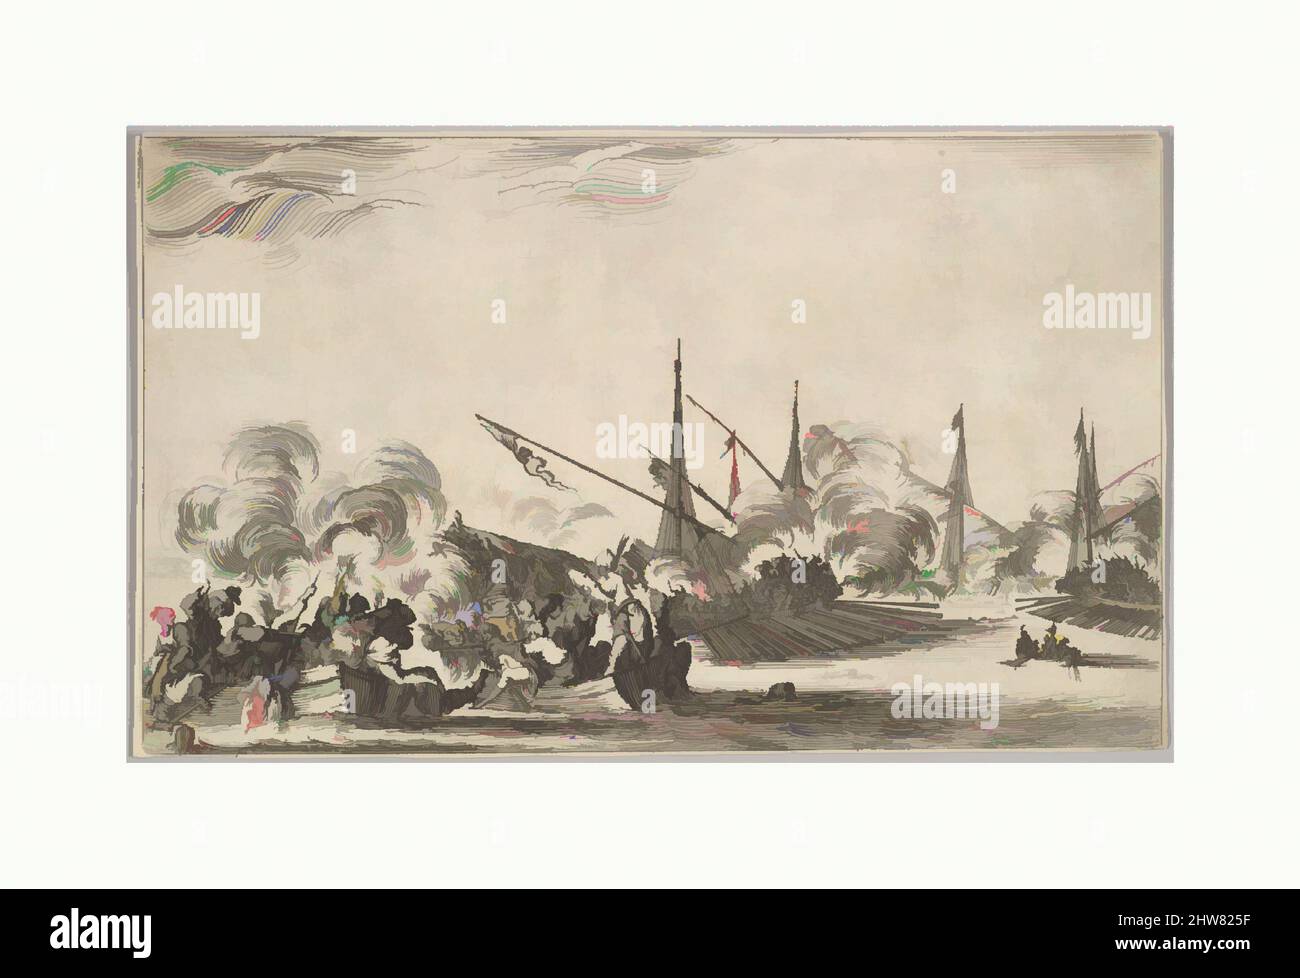 Art inspired by Combat between several rowboats and ships, two groups of men in rowboats fighting to left, two ships full of combatants to right, other ships and clouds of smoke in the background, from 'Set of eight nautical landscapes' (Suite de huit Marines), 1639, Etching, Sheet: 4, Classic works modernized by Artotop with a splash of modernity. Shapes, color and value, eye-catching visual impact on art. Emotions through freedom of artworks in a contemporary way. A timeless message pursuing a wildly creative new direction. Artists turning to the digital medium and creating the Artotop NFT Stock Photo